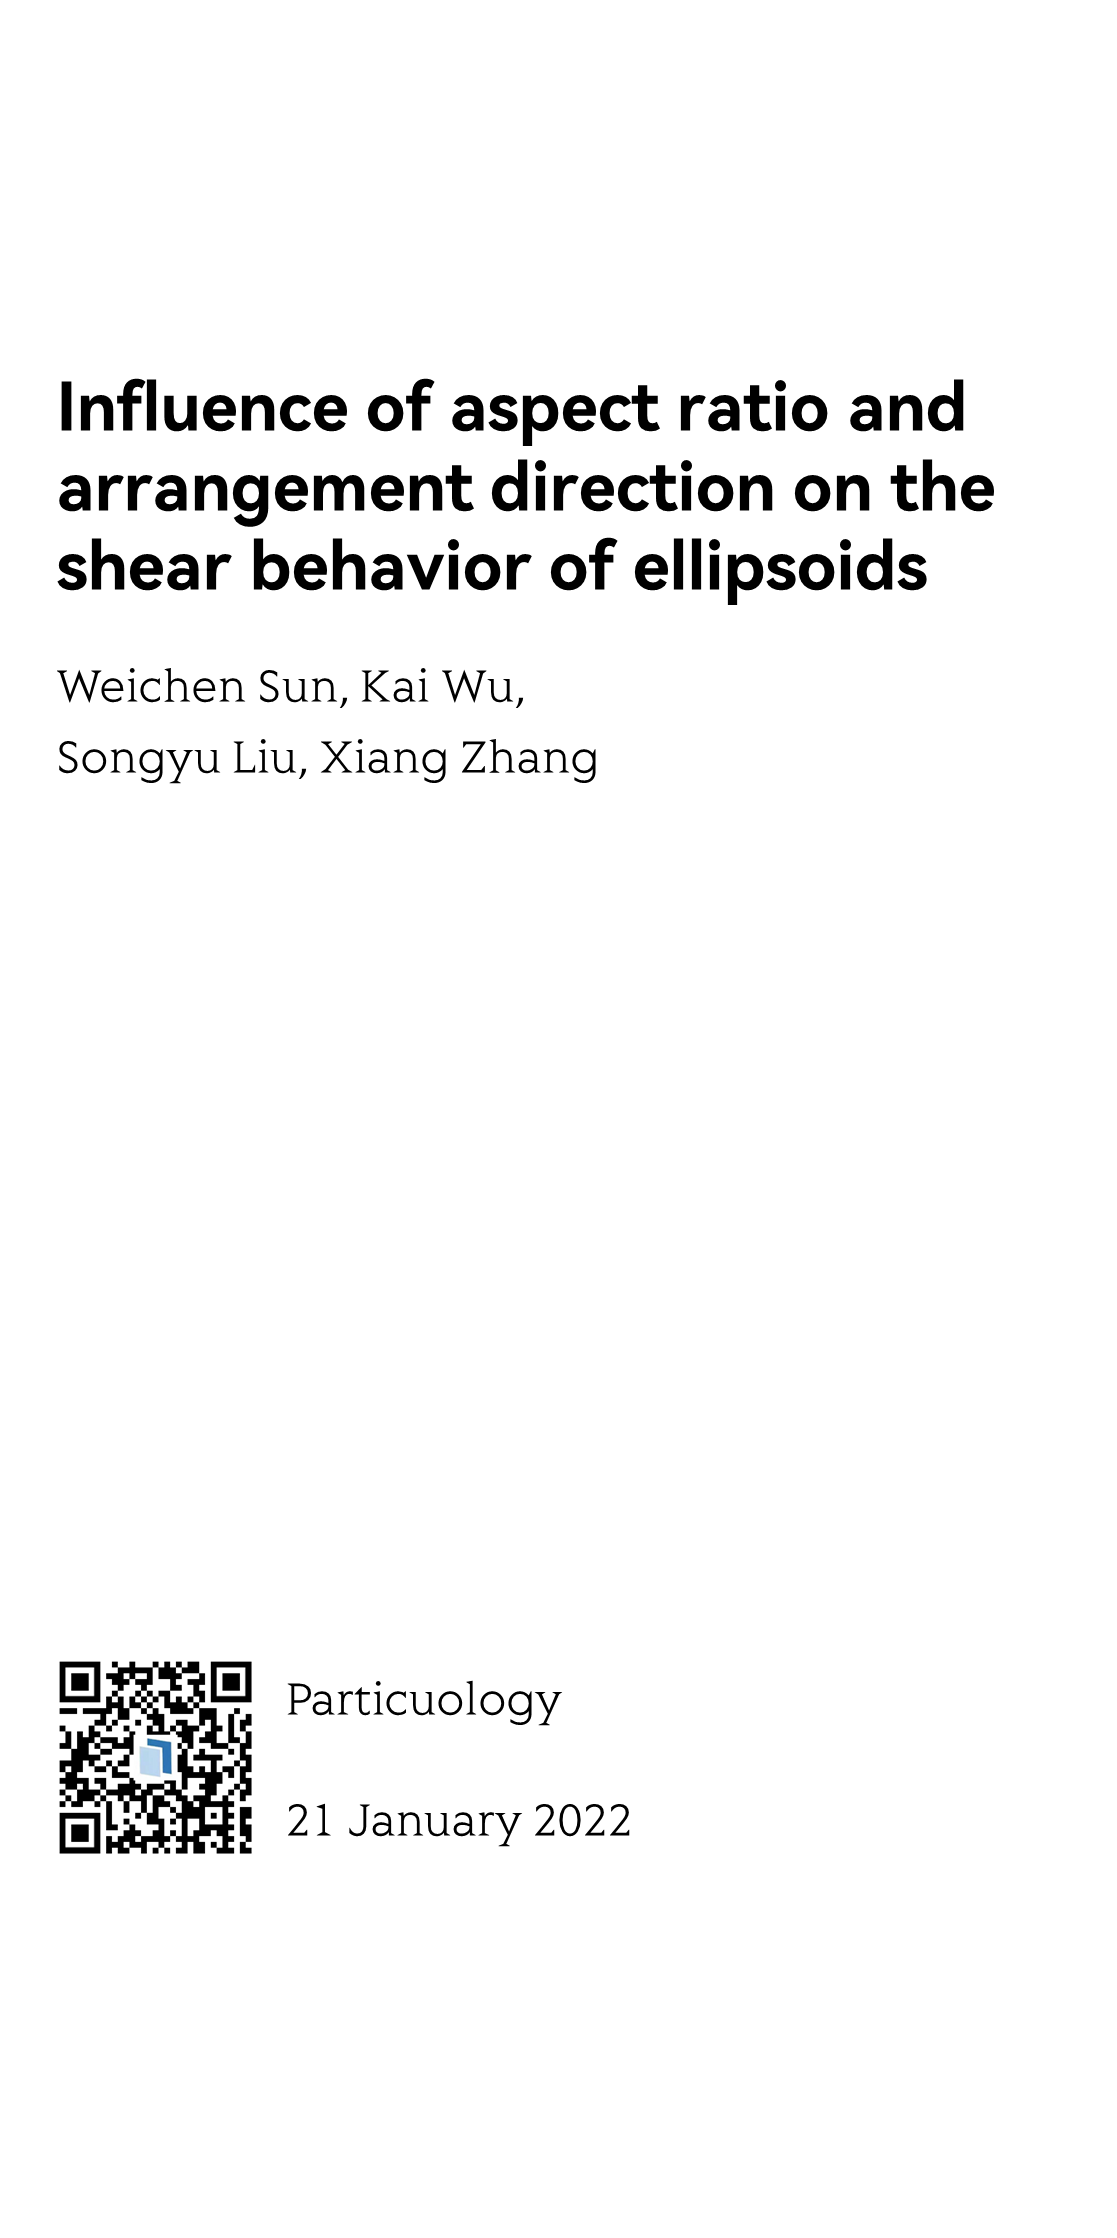 Influence of aspect ratio and arrangement direction on the shear behavior of ellipsoids_1